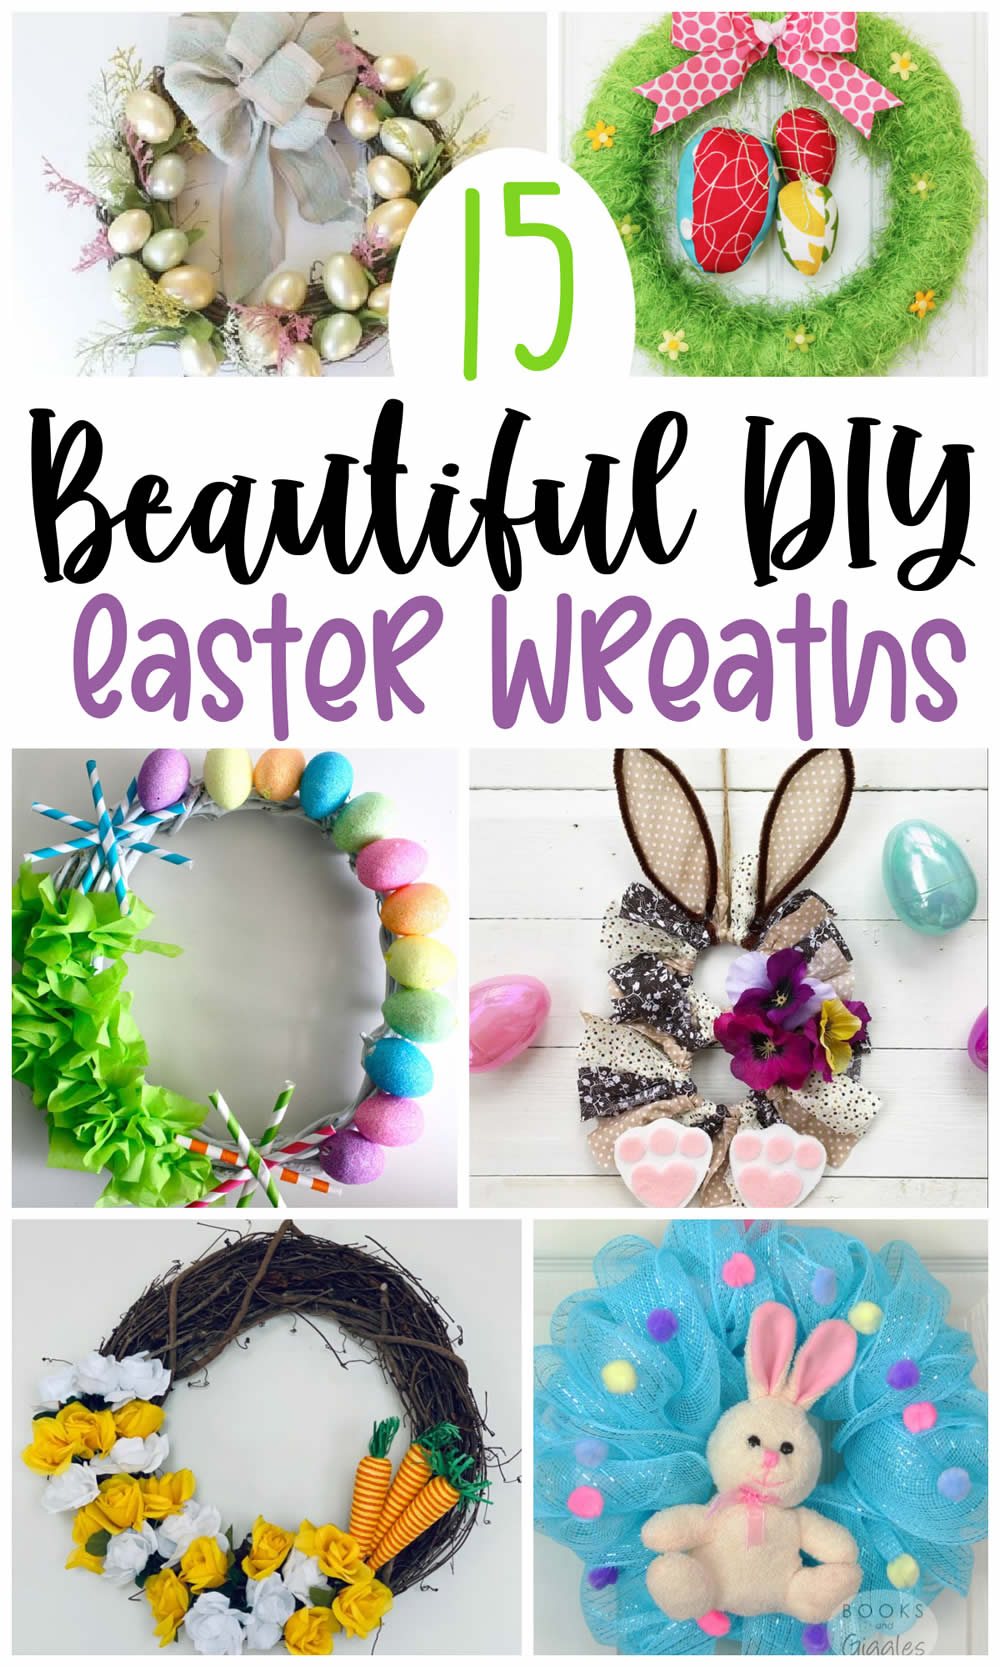 DIY Easter Wreaths - Cute Spring Wreath Craft Projects